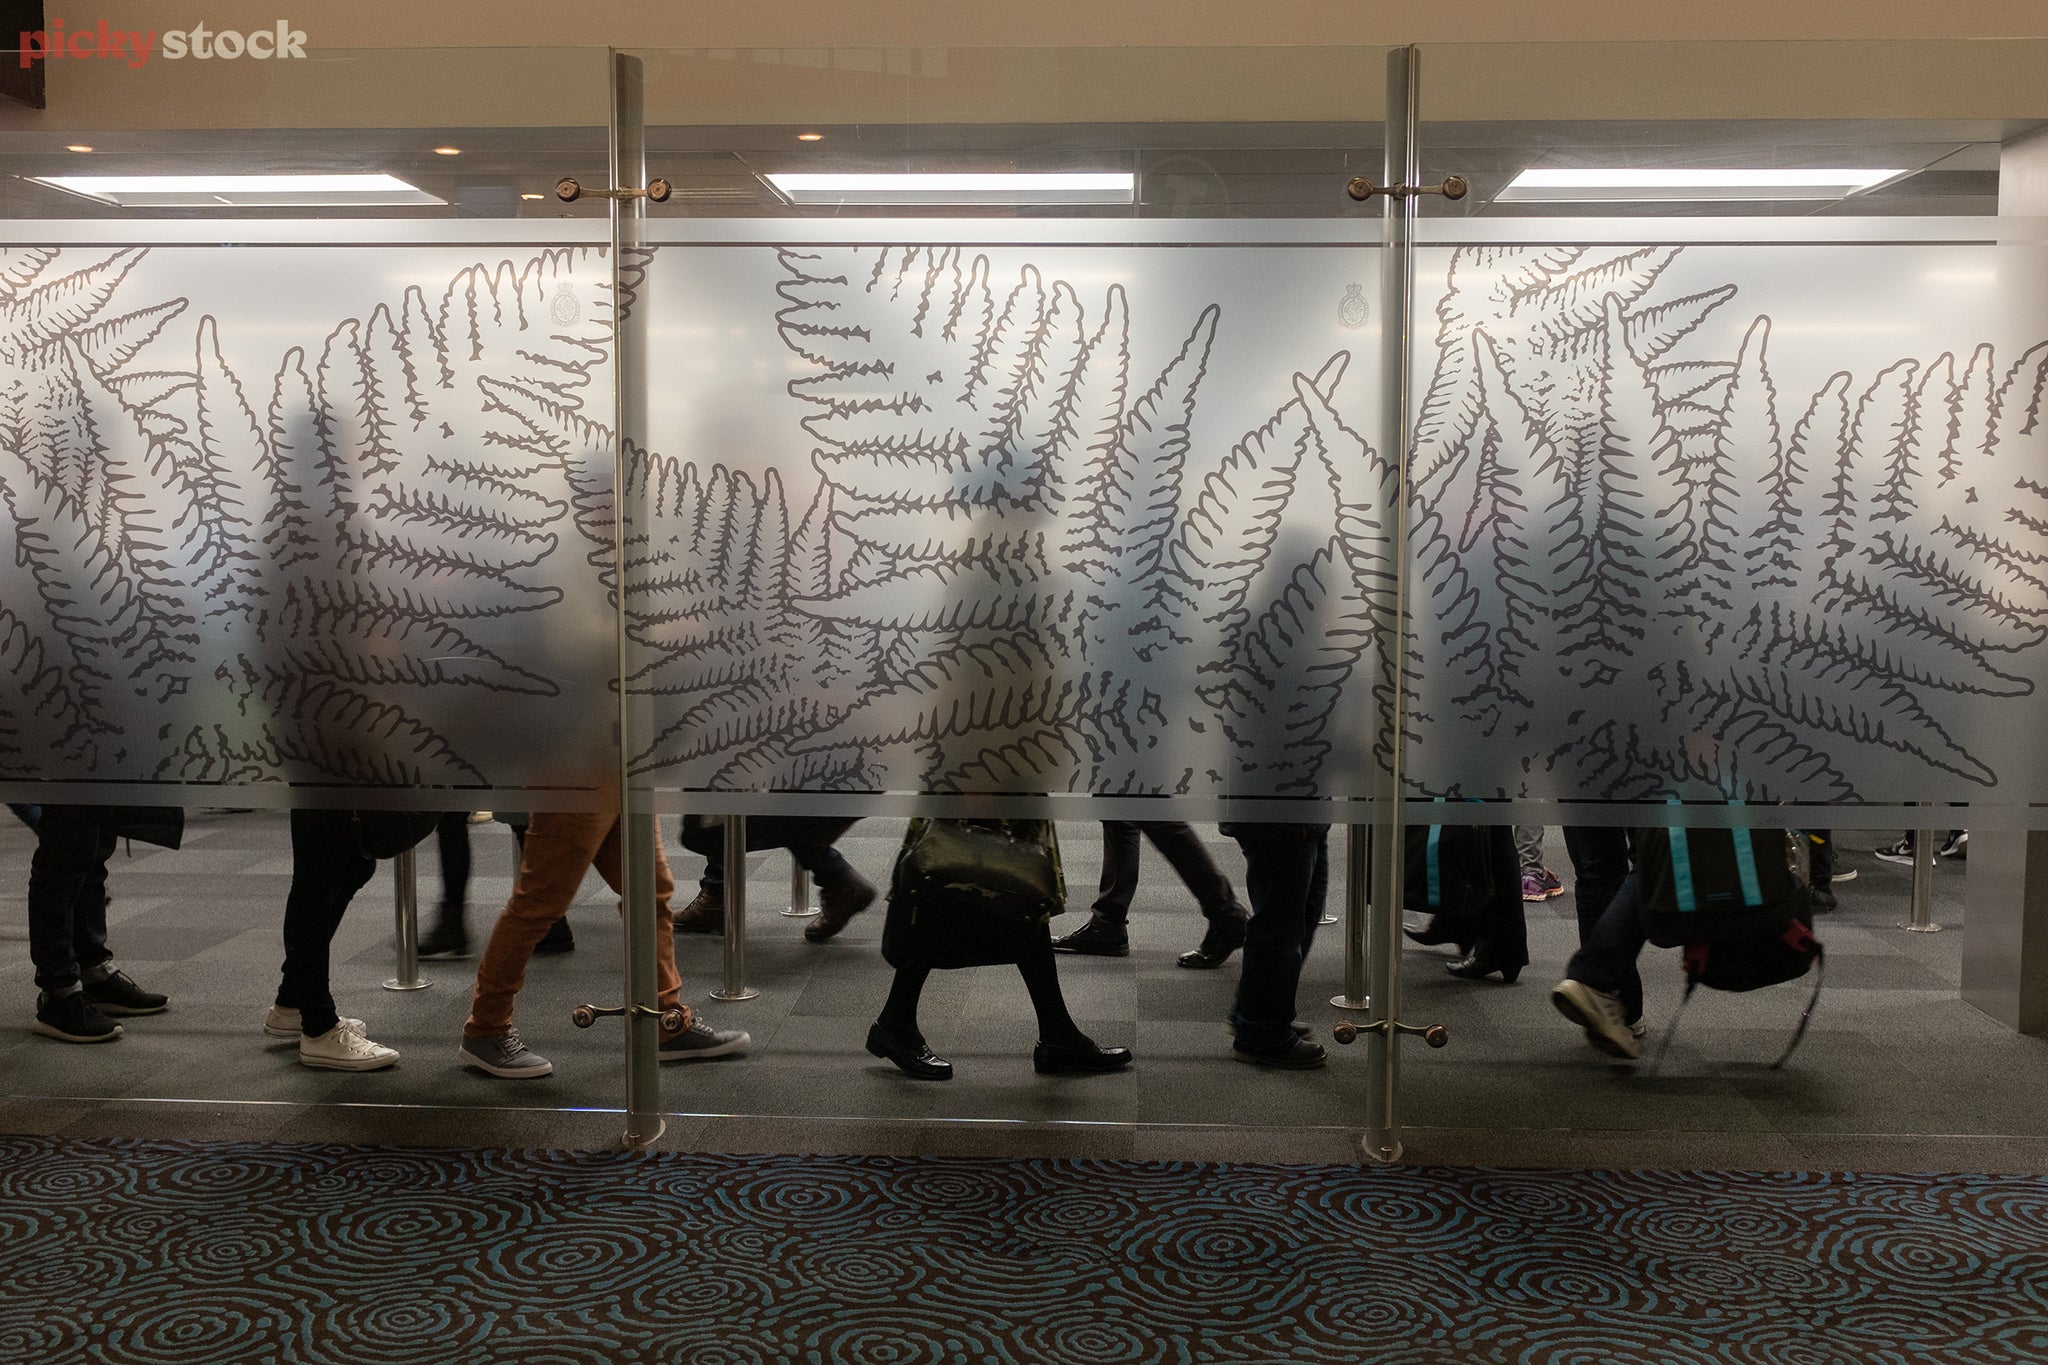 A landscape of frosted security glass with a fern pattern obscures the details of travelers waiting at an airport cue. Overhead square lights over checked carpeting and a primal spiraling rug.